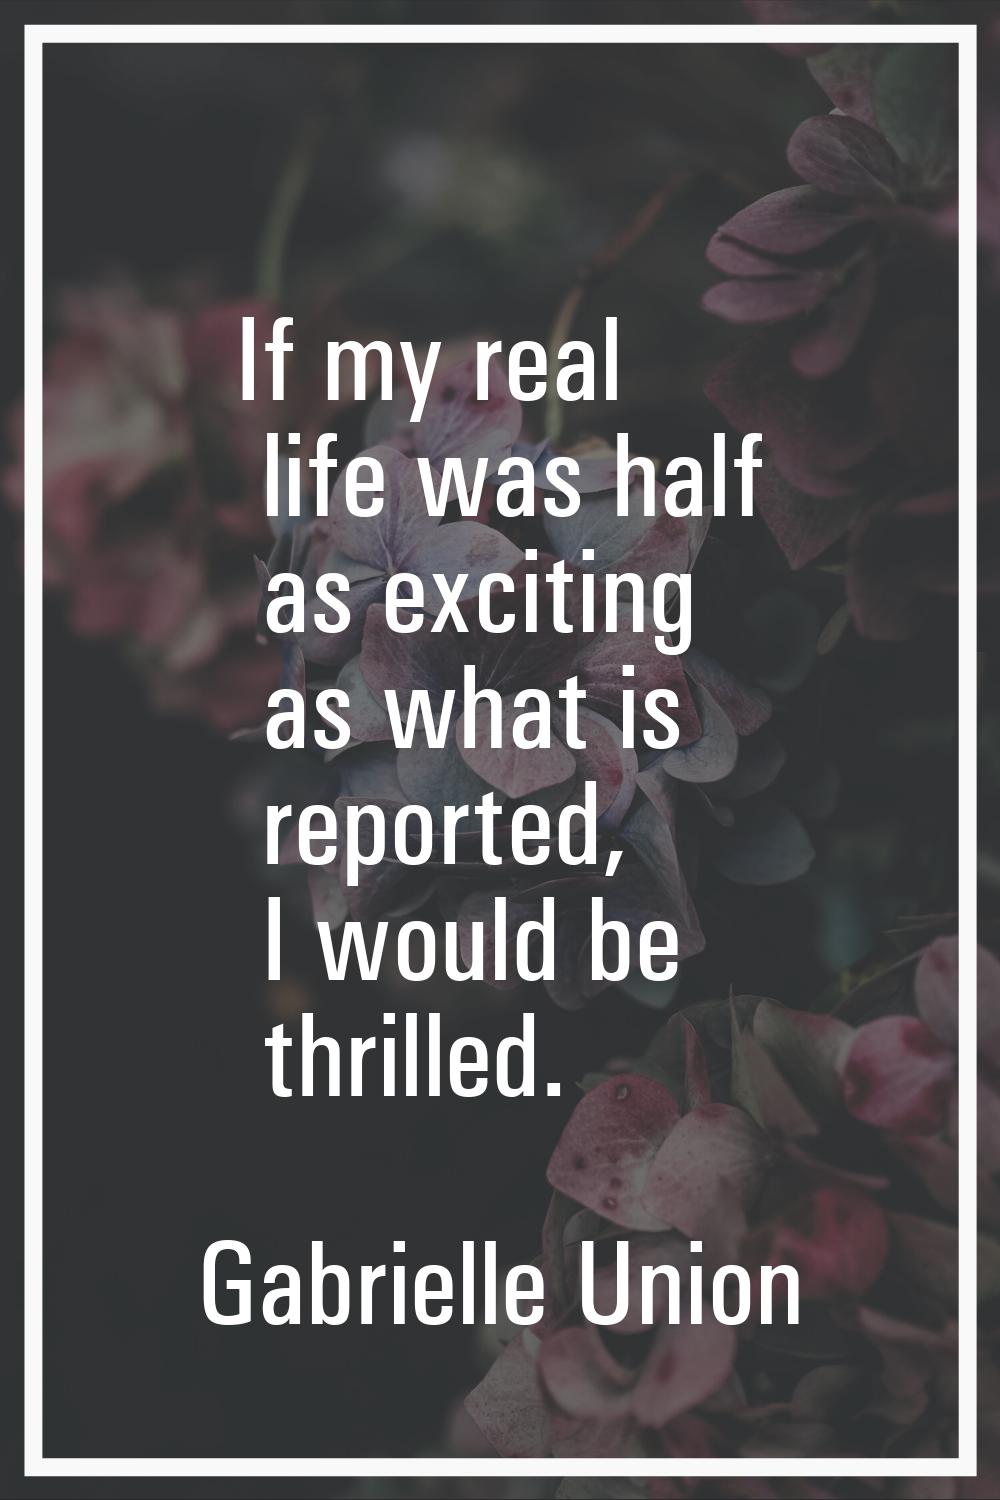 If my real life was half as exciting as what is reported, I would be thrilled.